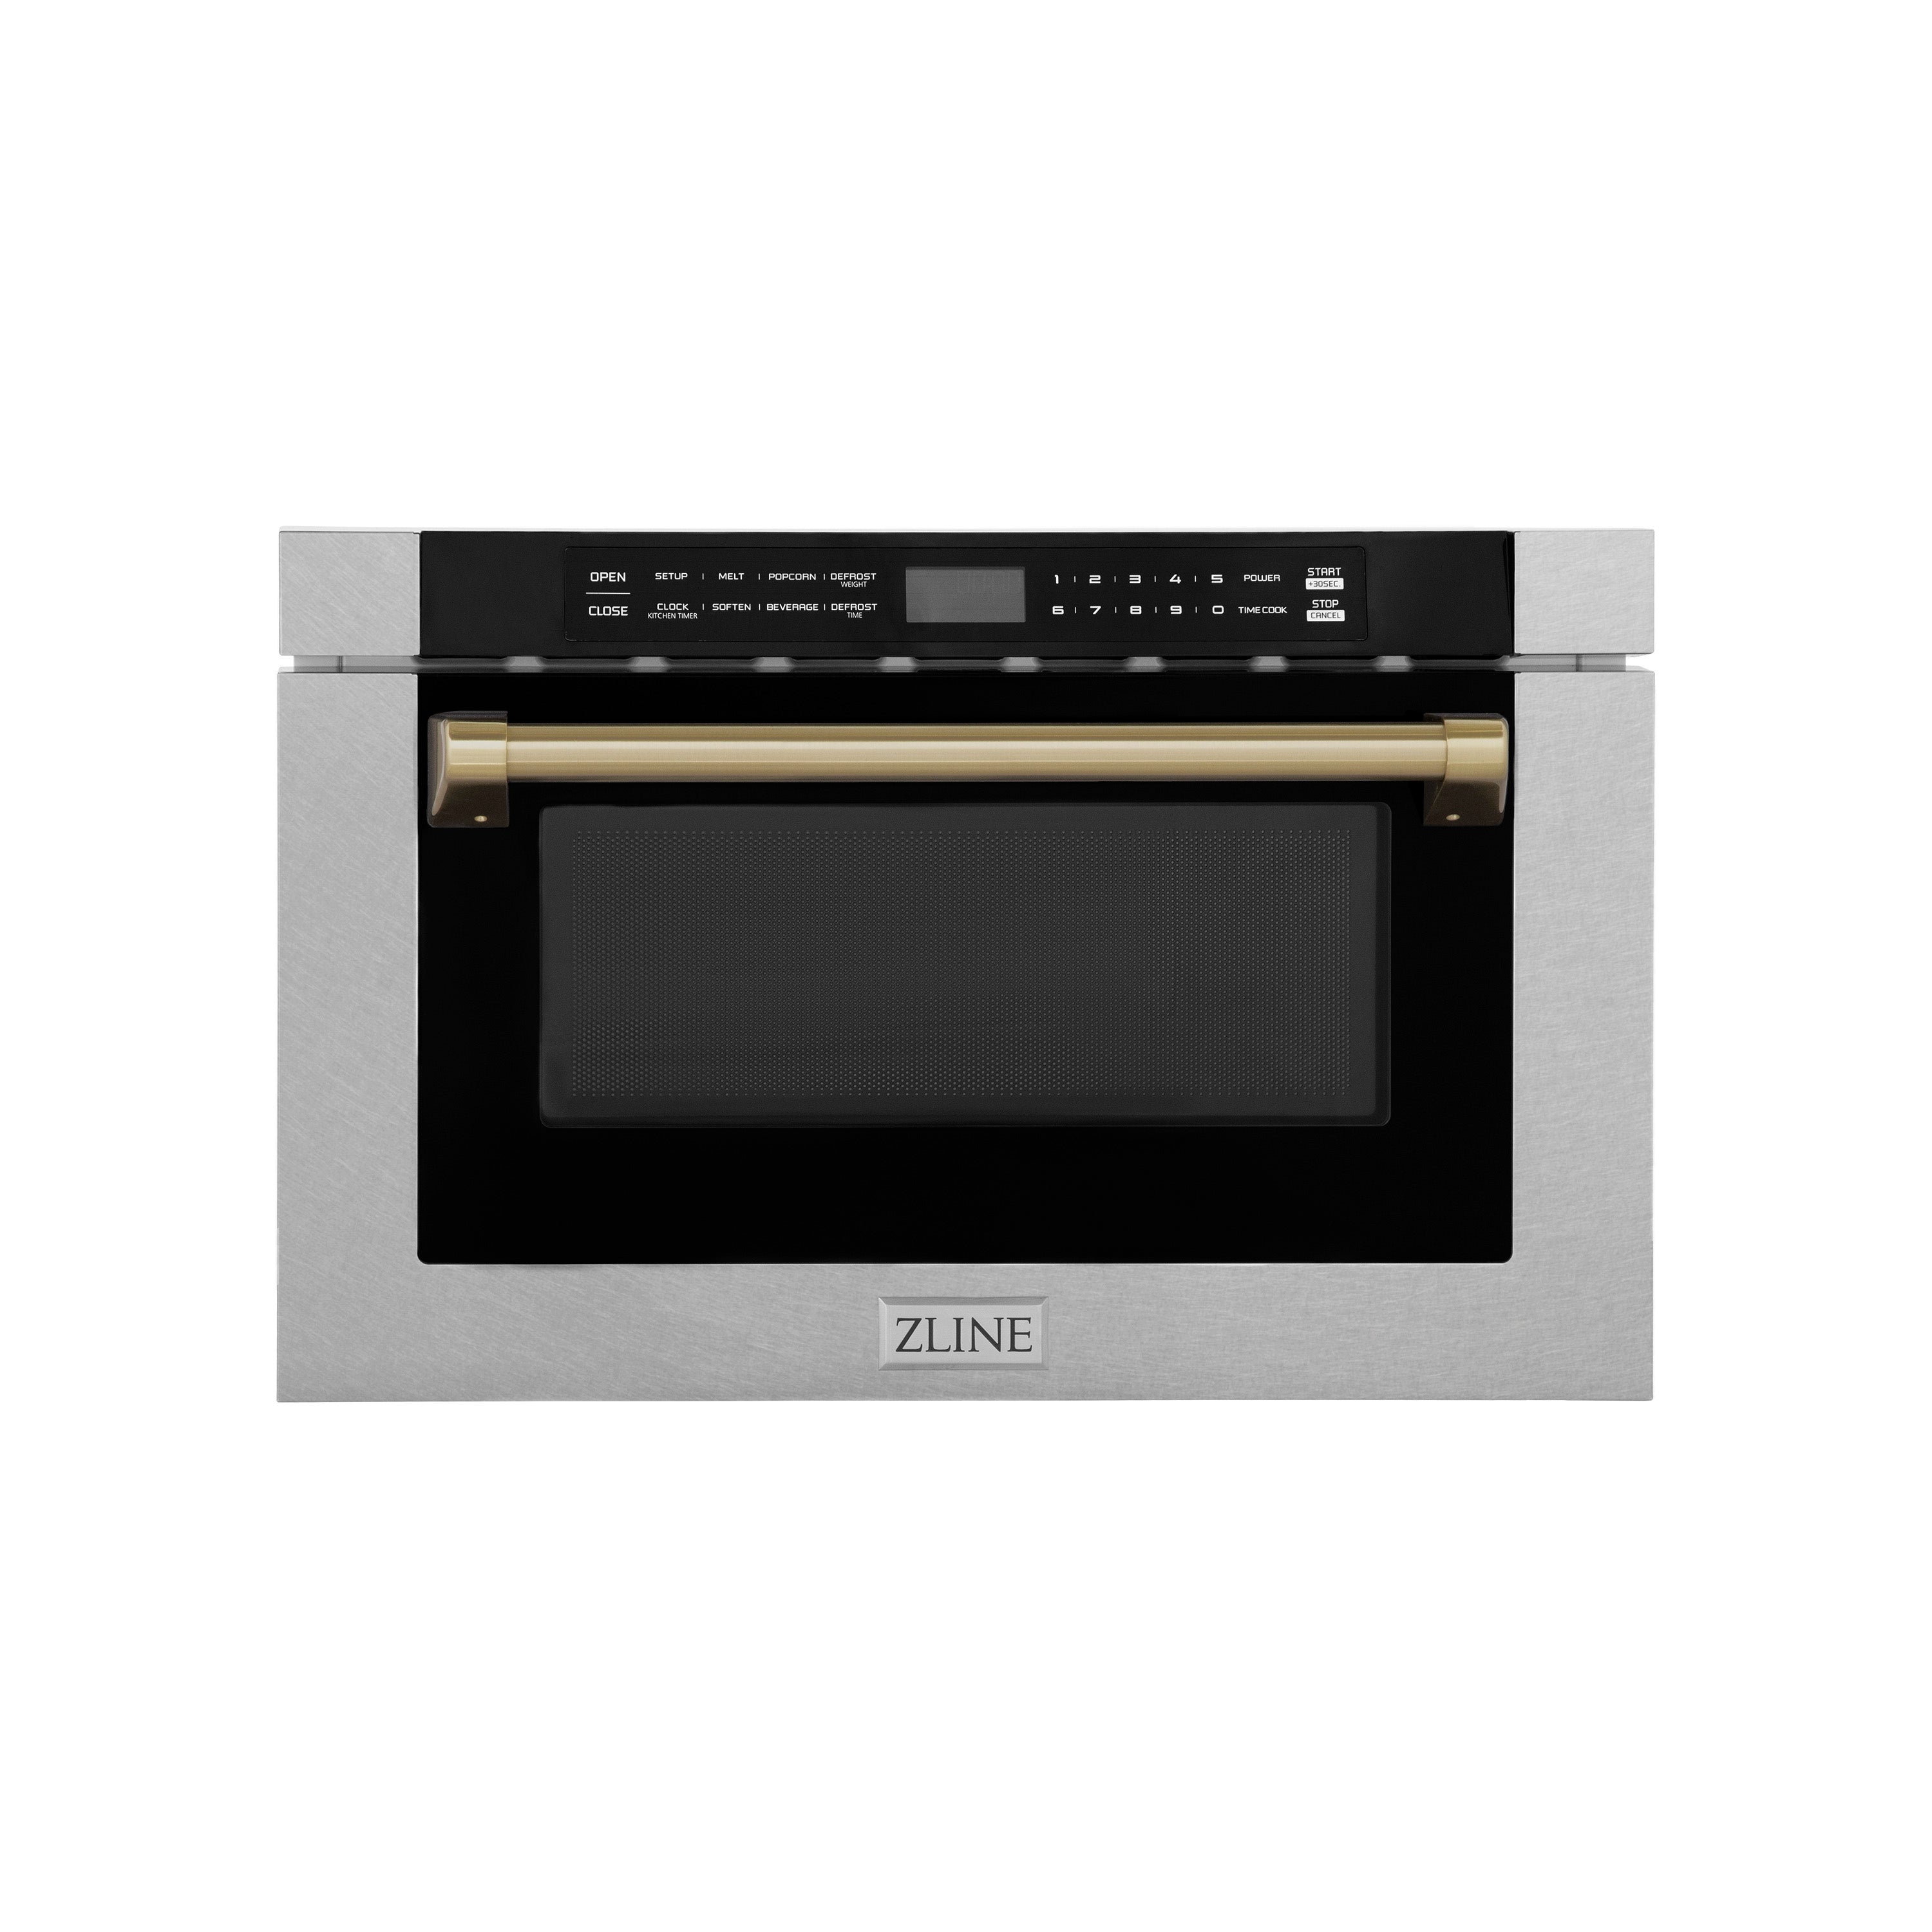 ZLINE Autograph Edition 24 in. Microwave in DuraSnow Stainless Steel with Traditional Handles and Champagne Bronze Accents (MWDZ-1-SS-H-CB) Front View Drawer Closed